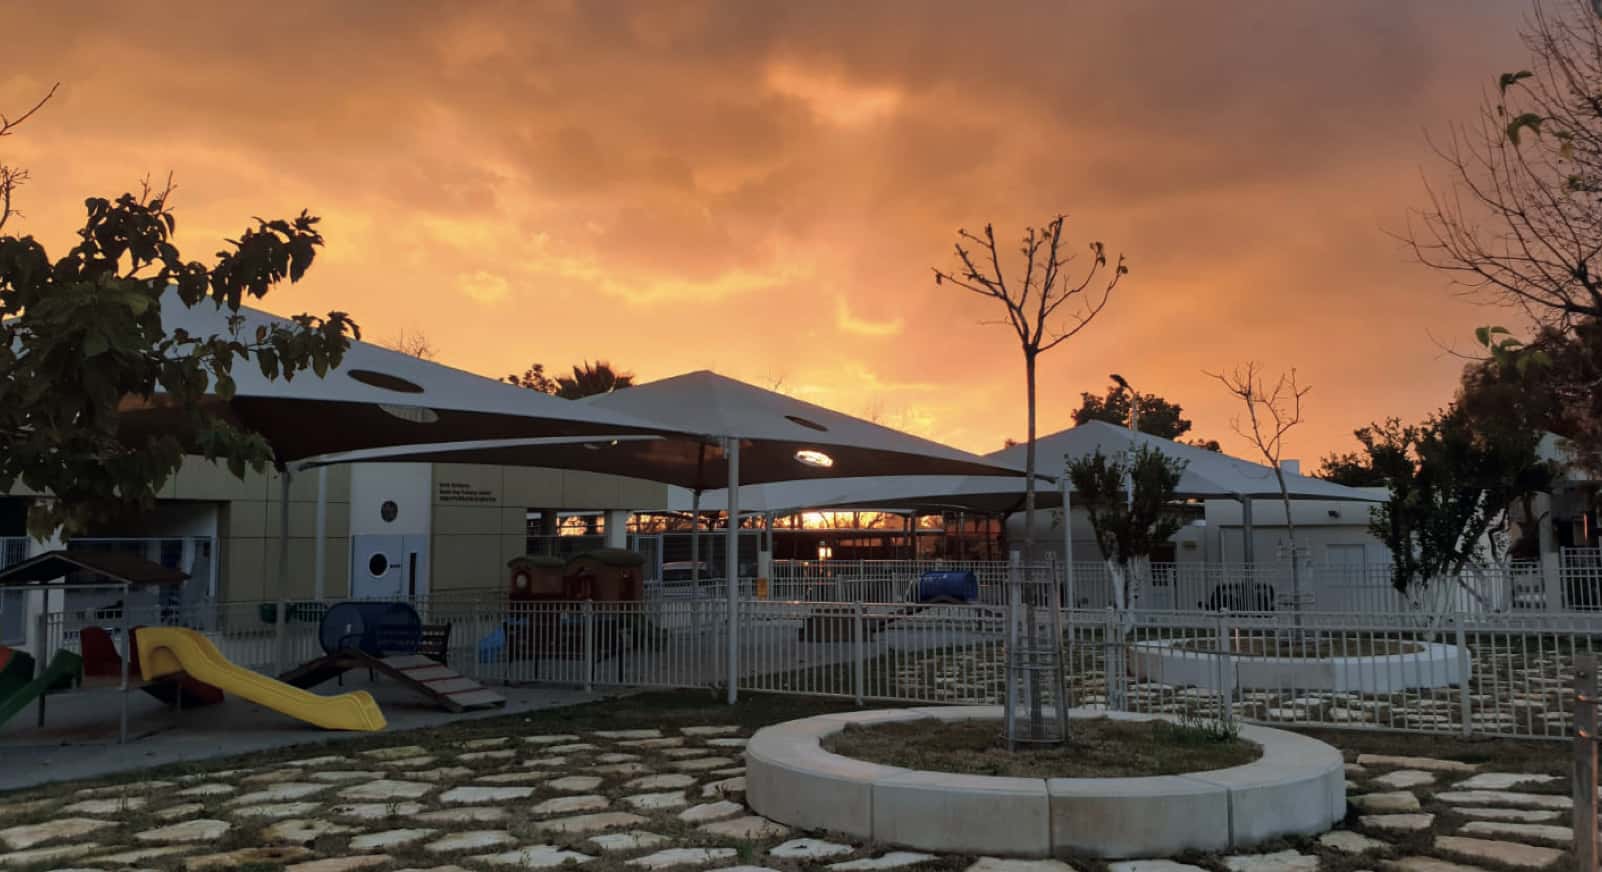 Image of the Israel Guide Dog Center